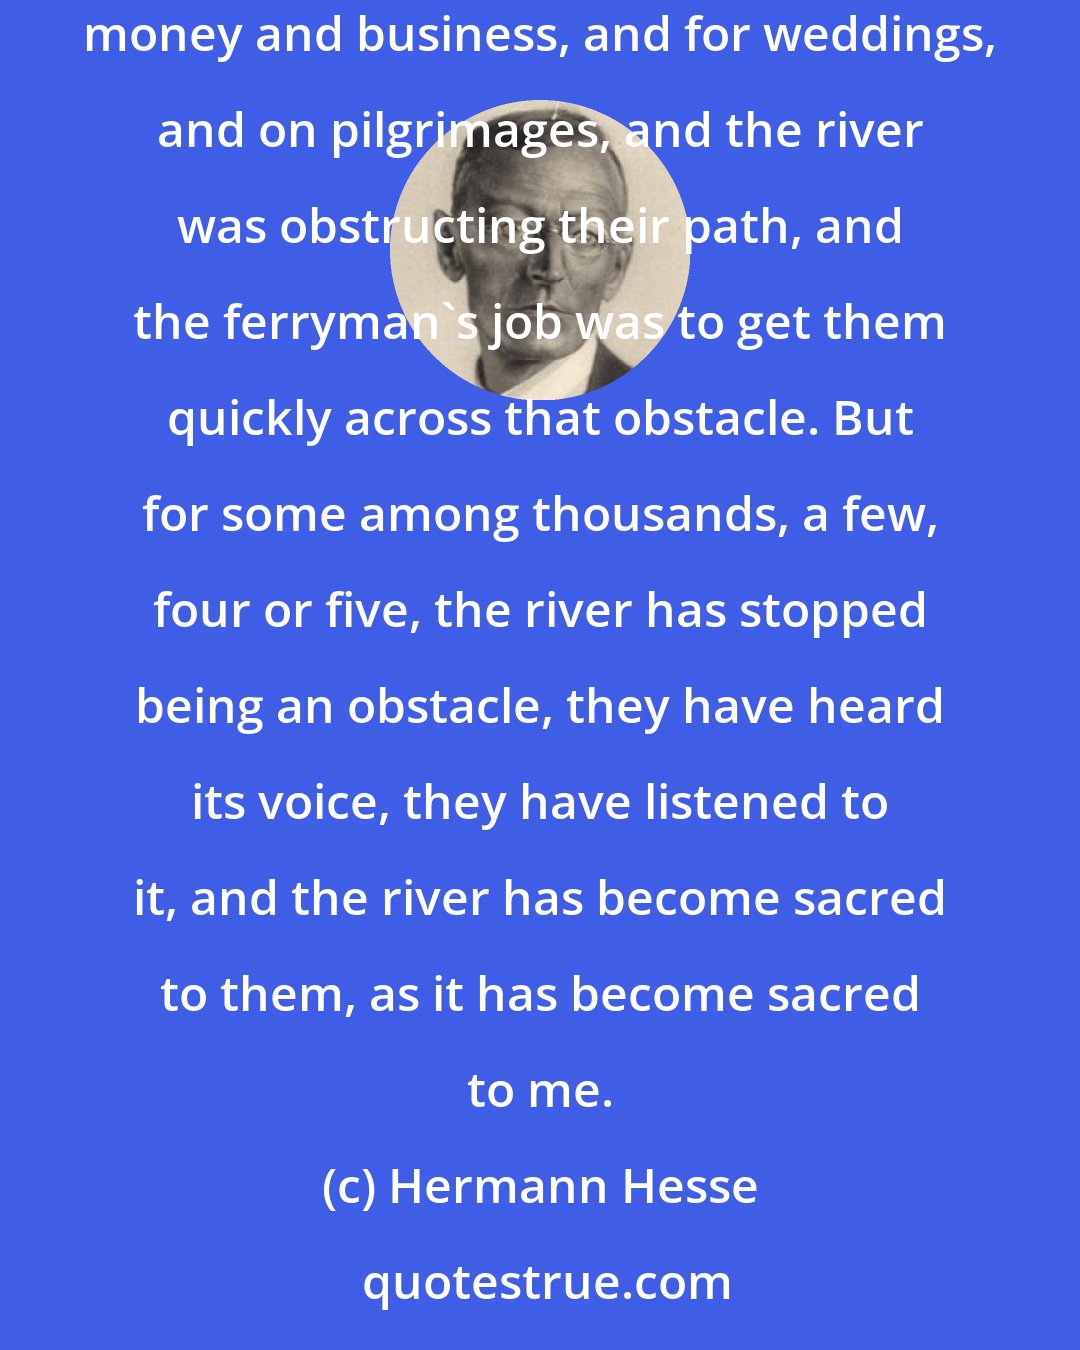 Hermann Hesse: I have transported many, thousands; and to all of them, my river has been nothing but an obstacle on their travels. They travelled to seek money and business, and for weddings, and on pilgrimages, and the river was obstructing their path, and the ferryman's job was to get them quickly across that obstacle. But for some among thousands, a few, four or five, the river has stopped being an obstacle, they have heard its voice, they have listened to it, and the river has become sacred to them, as it has become sacred to me.